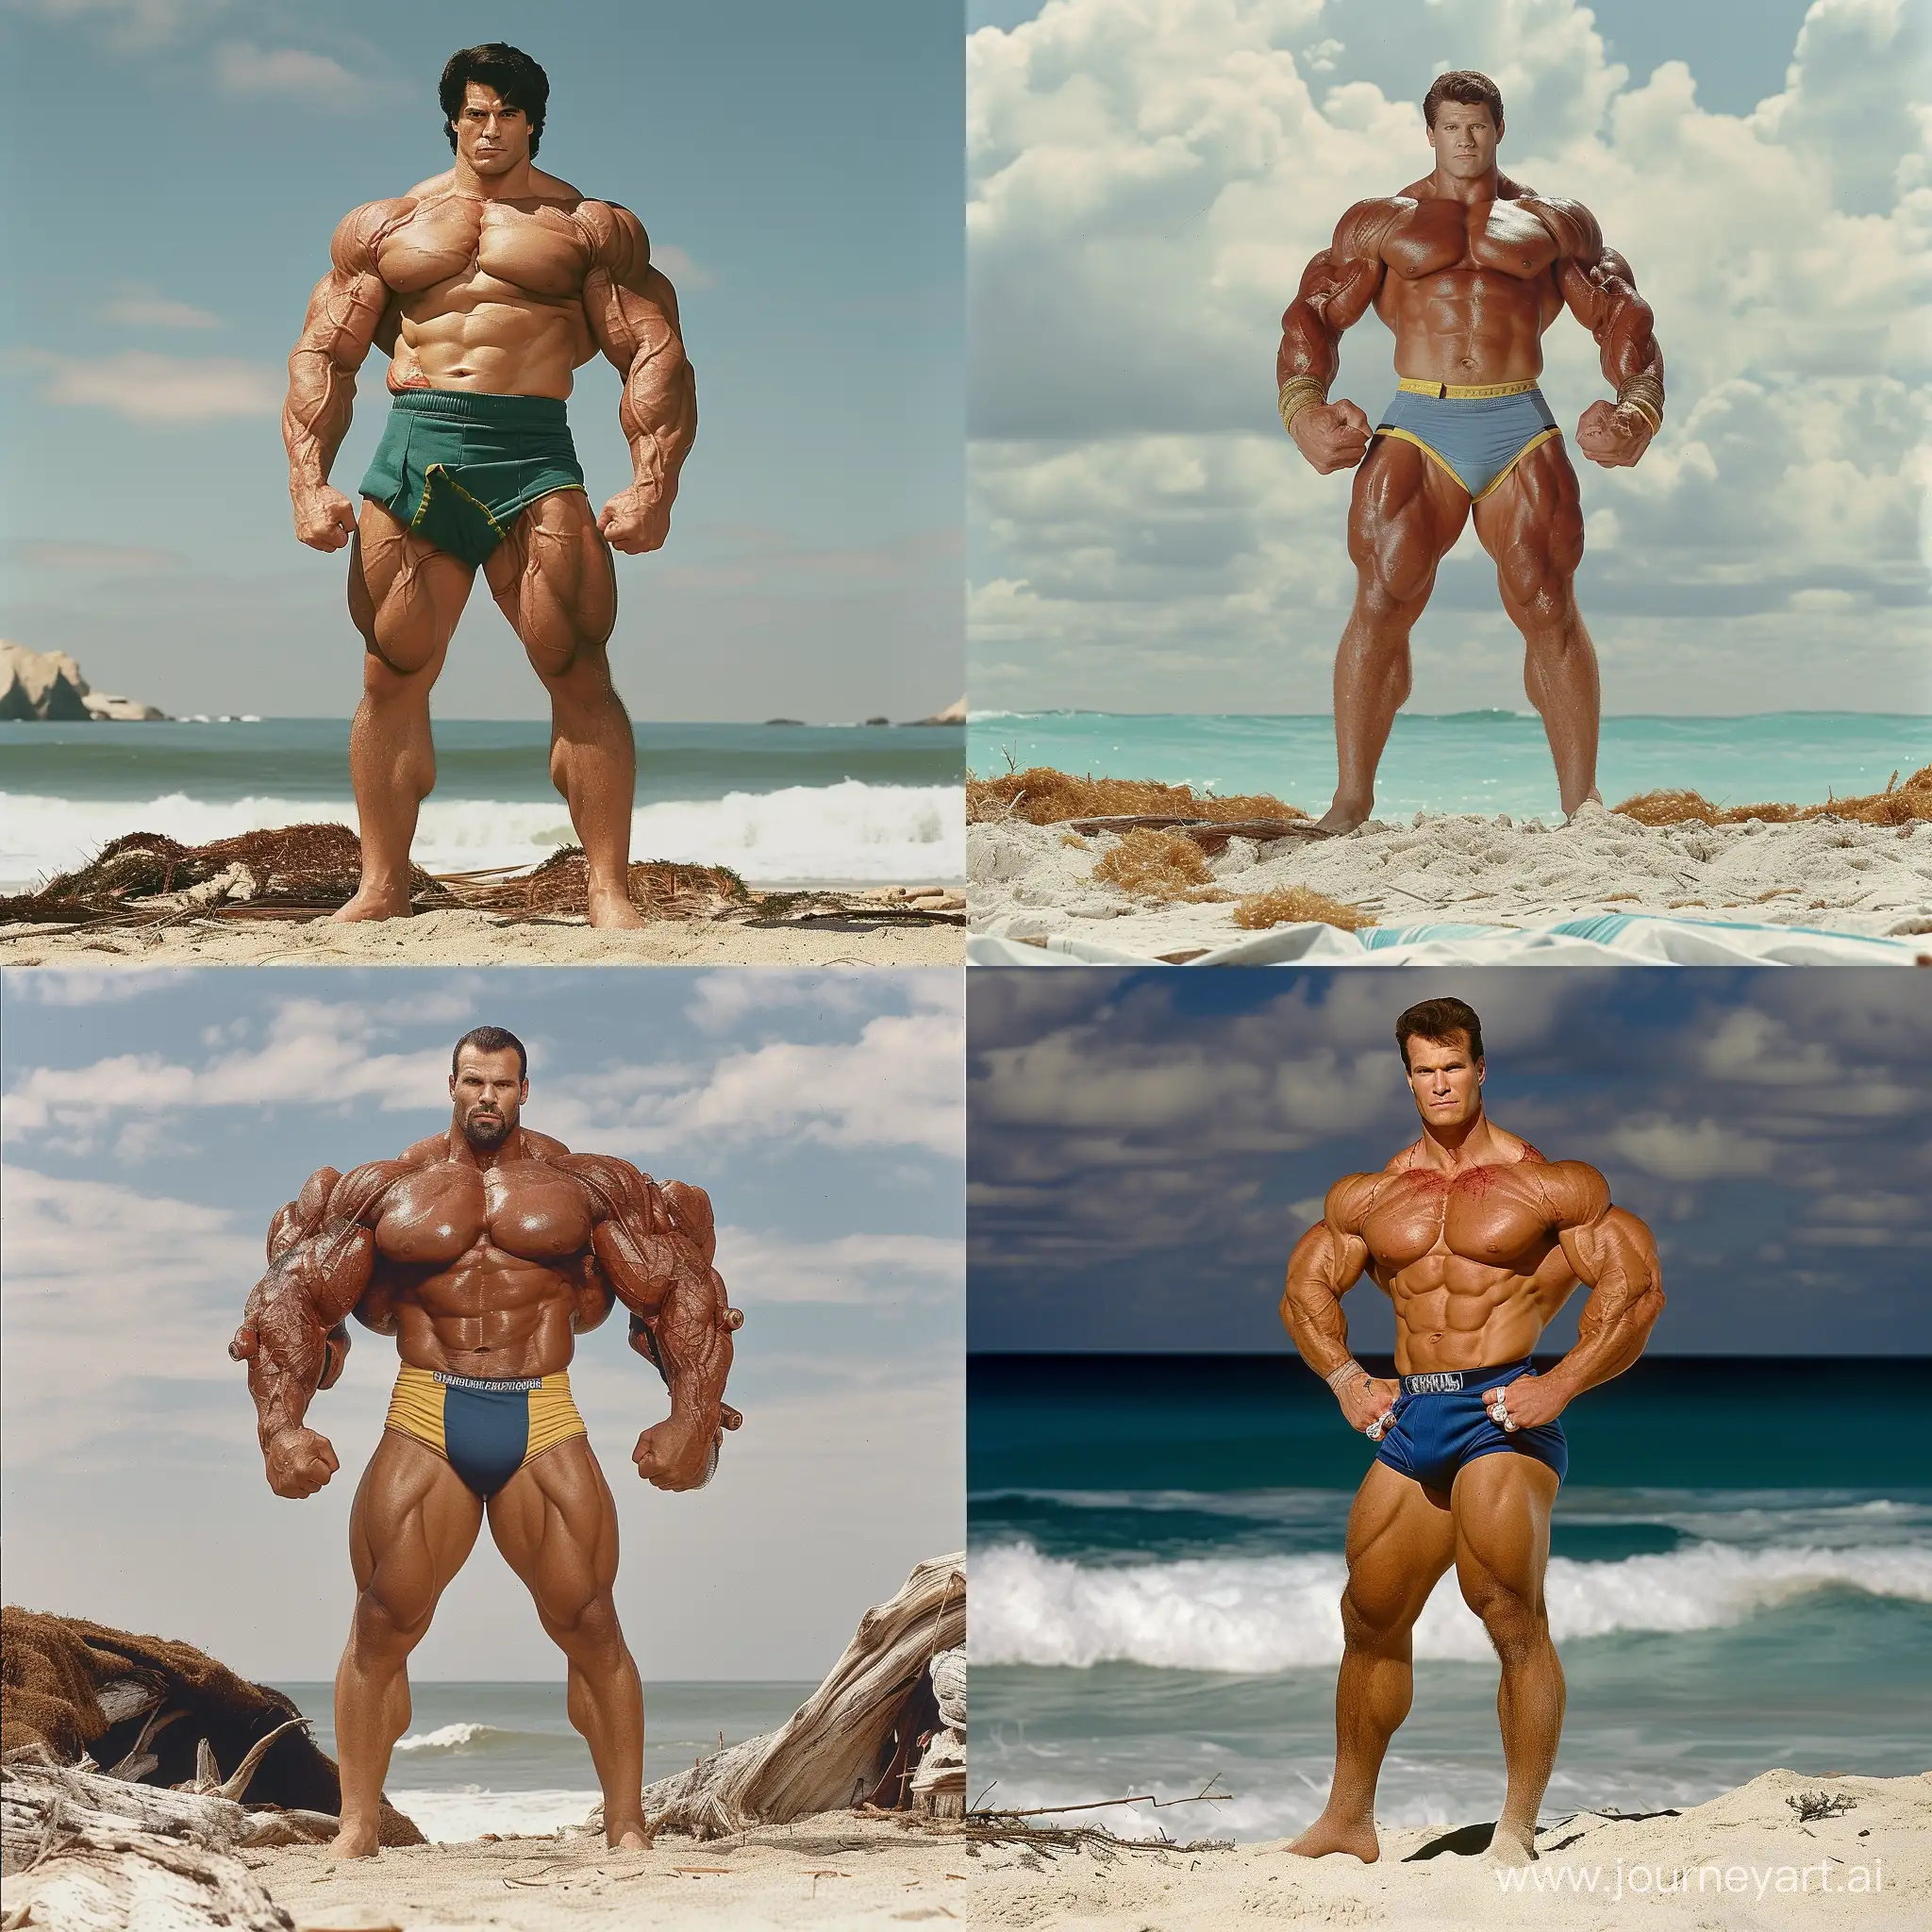 hyper muscular bodybuilder, 25 year old, 1990's, 500 pounds of muscle, speedo, hyper oversized muscles, massive muscular arms, massive muscular biceps, massive muscular forearms, massive muscular legs, massive muscular thighs, massive muscular calves, ripped, abs, veins, on the beach